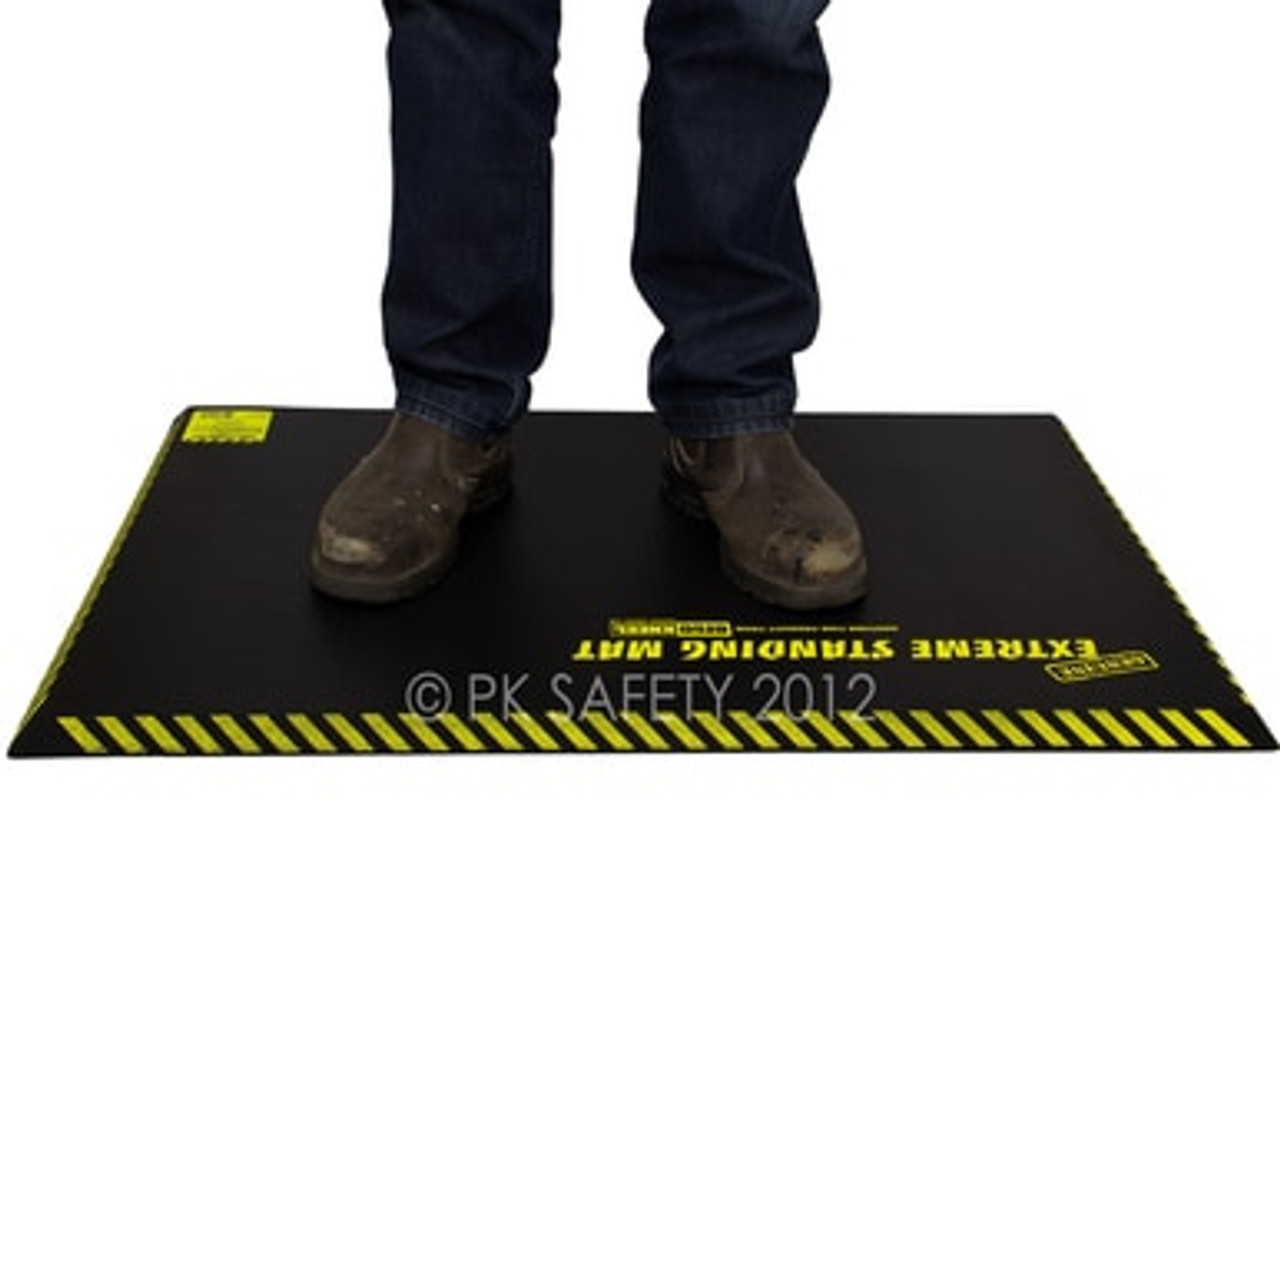  Anti Fatigue Mats Industrial, Ergonomic Standing Floor Mat, Work  Mats for Standing Standing Support for Leg & Back Pain, Waterproof,  Non-Slip (Color : Style 2, Size : 50x40x2cm/19.7x15.7x0.8in) : Home 